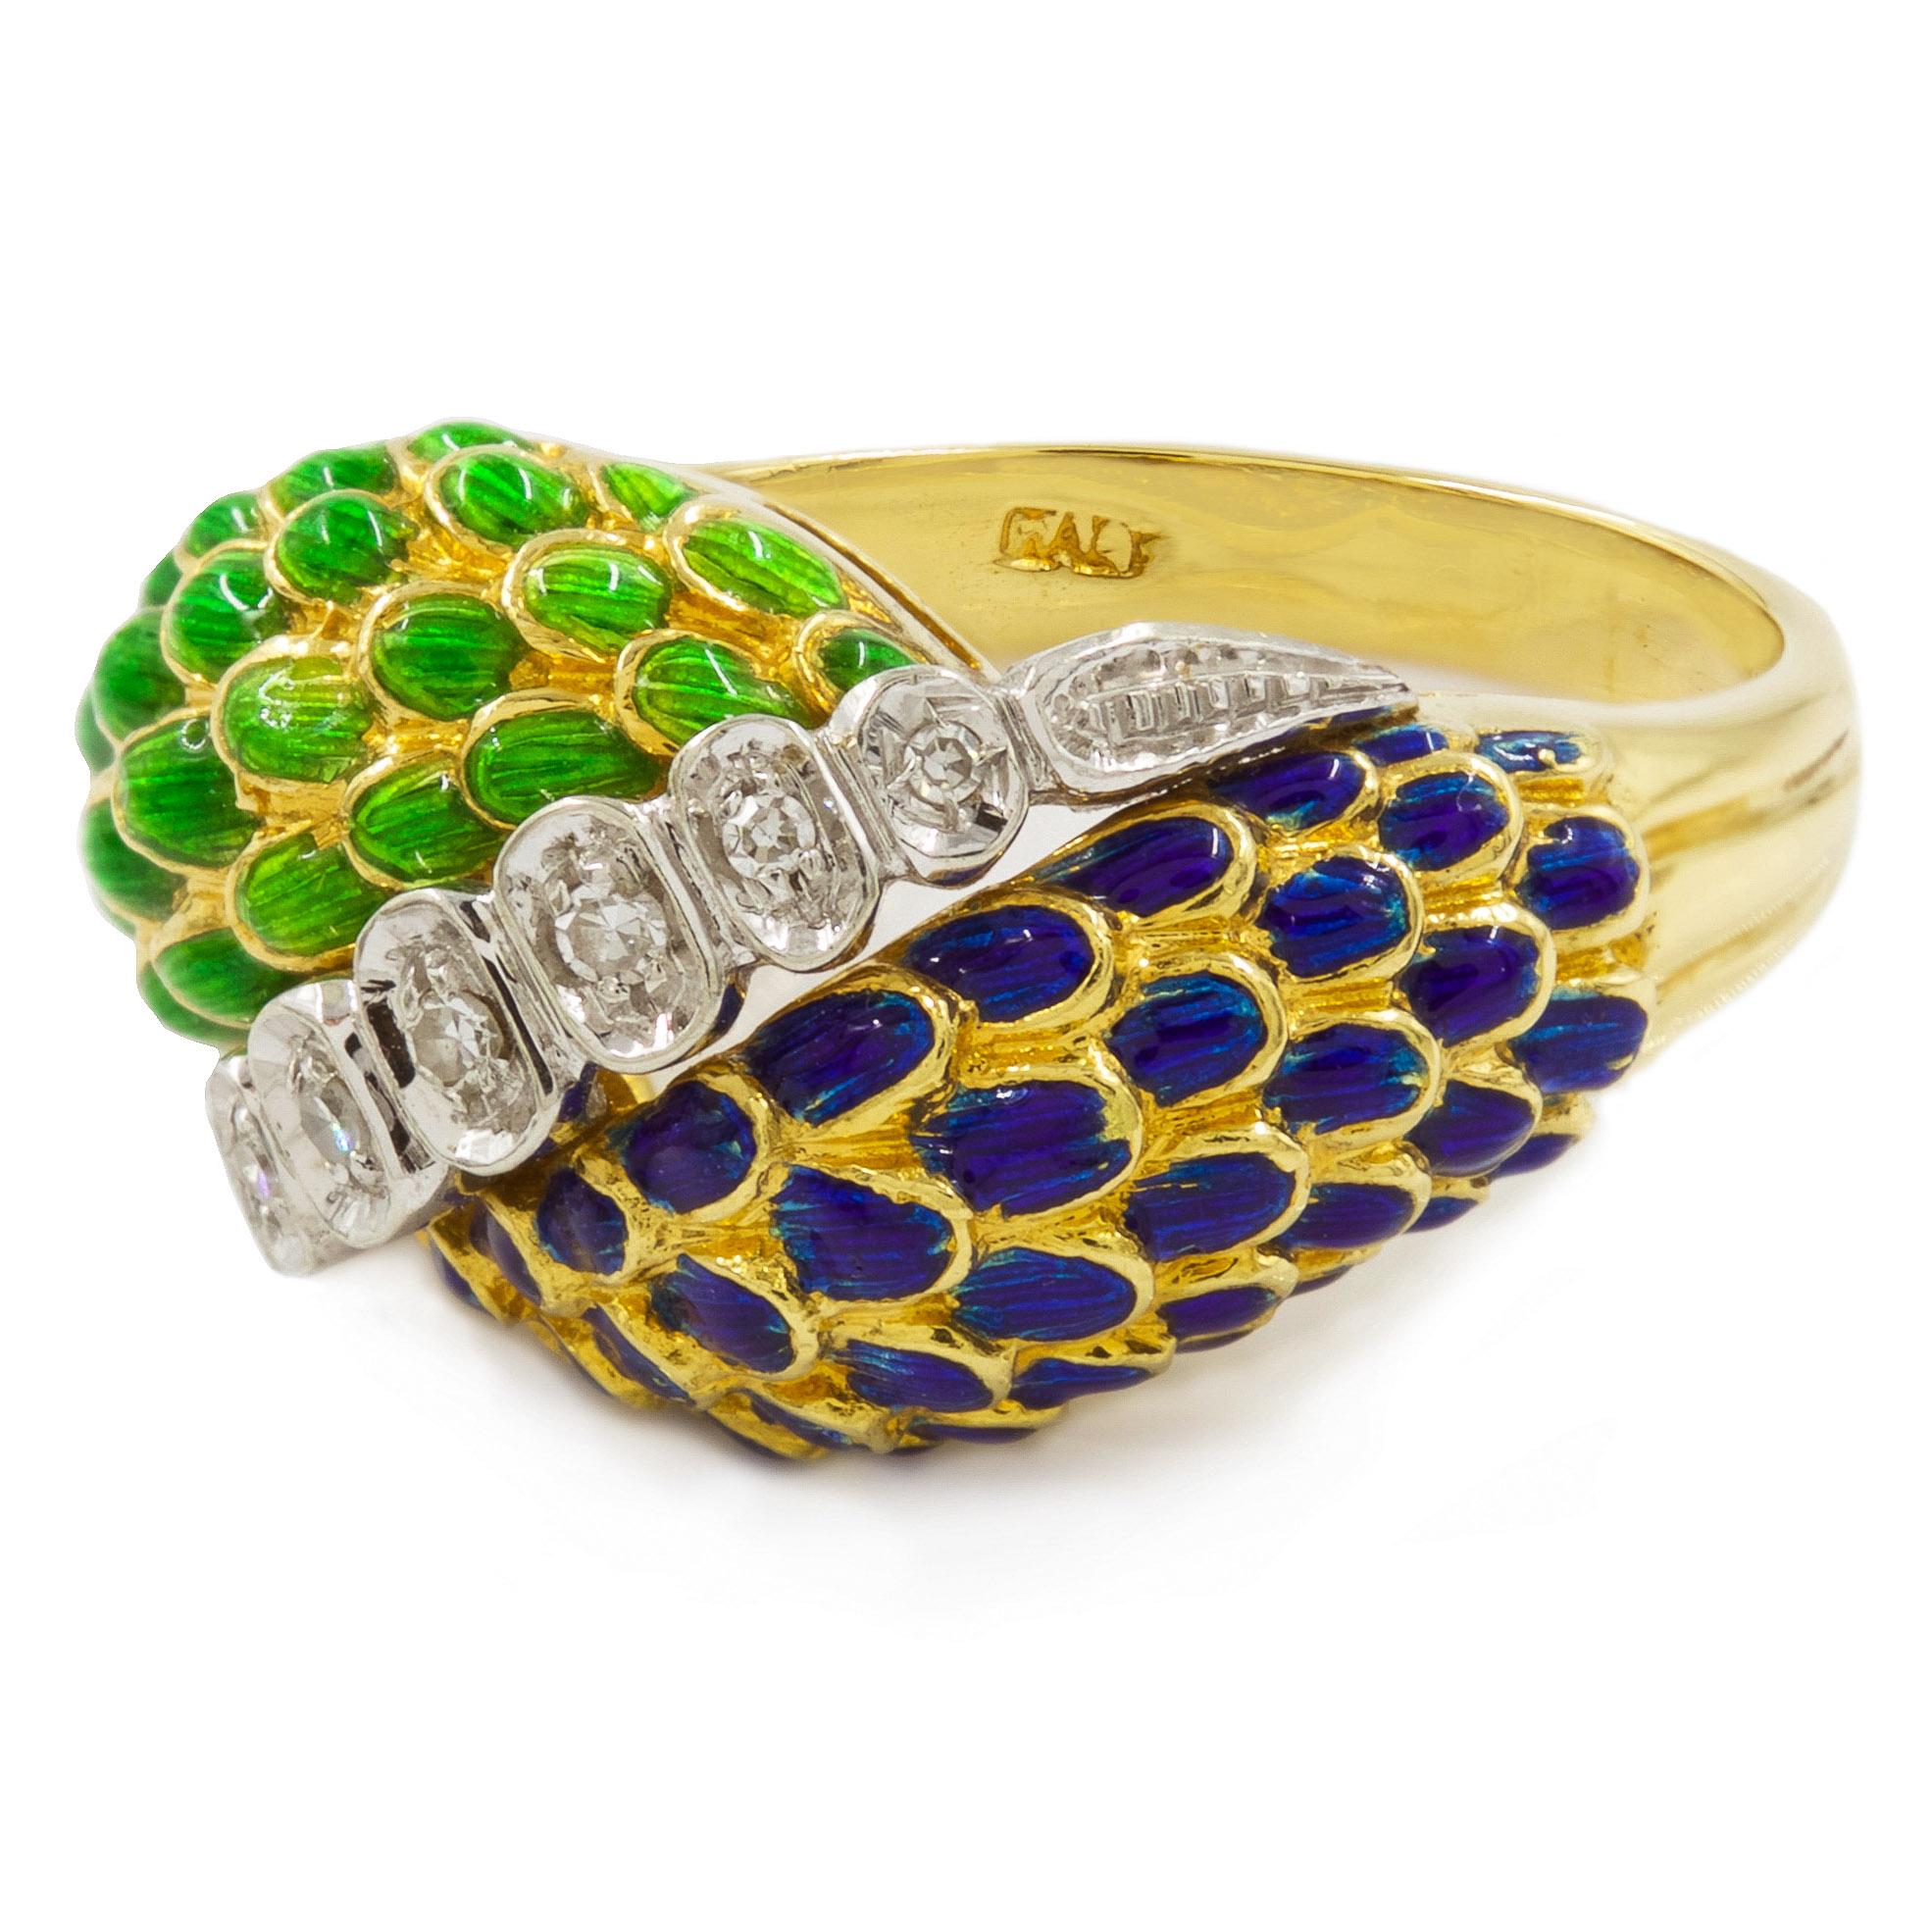 VINTAGE 18K GOLD, BLUE & GREEN ENAMEL AND DIAMOND RING
9.8 grams total weight  7 round brilliant-cut diamonds  marked 